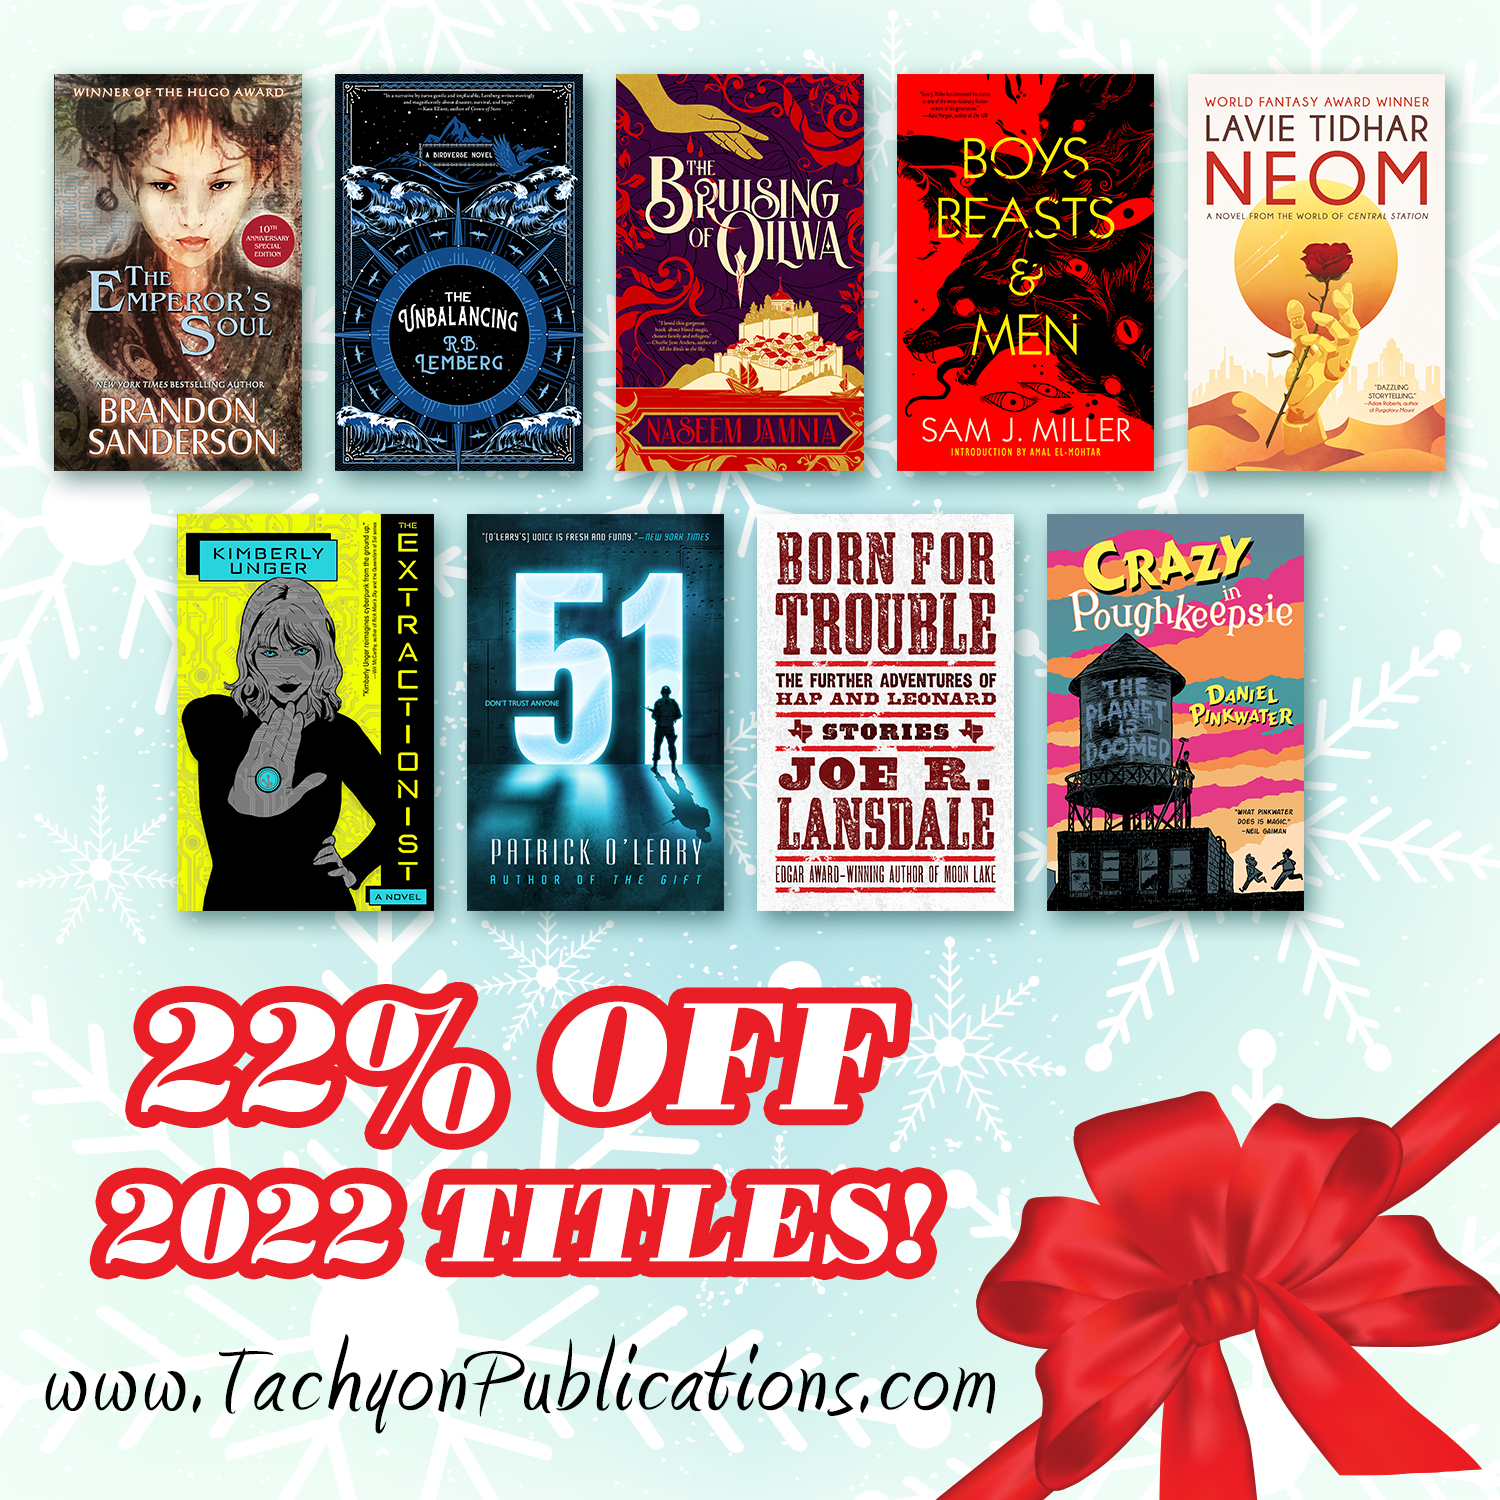 Tachyon Publications is giving 22% off on all 2022 titles until 2023!